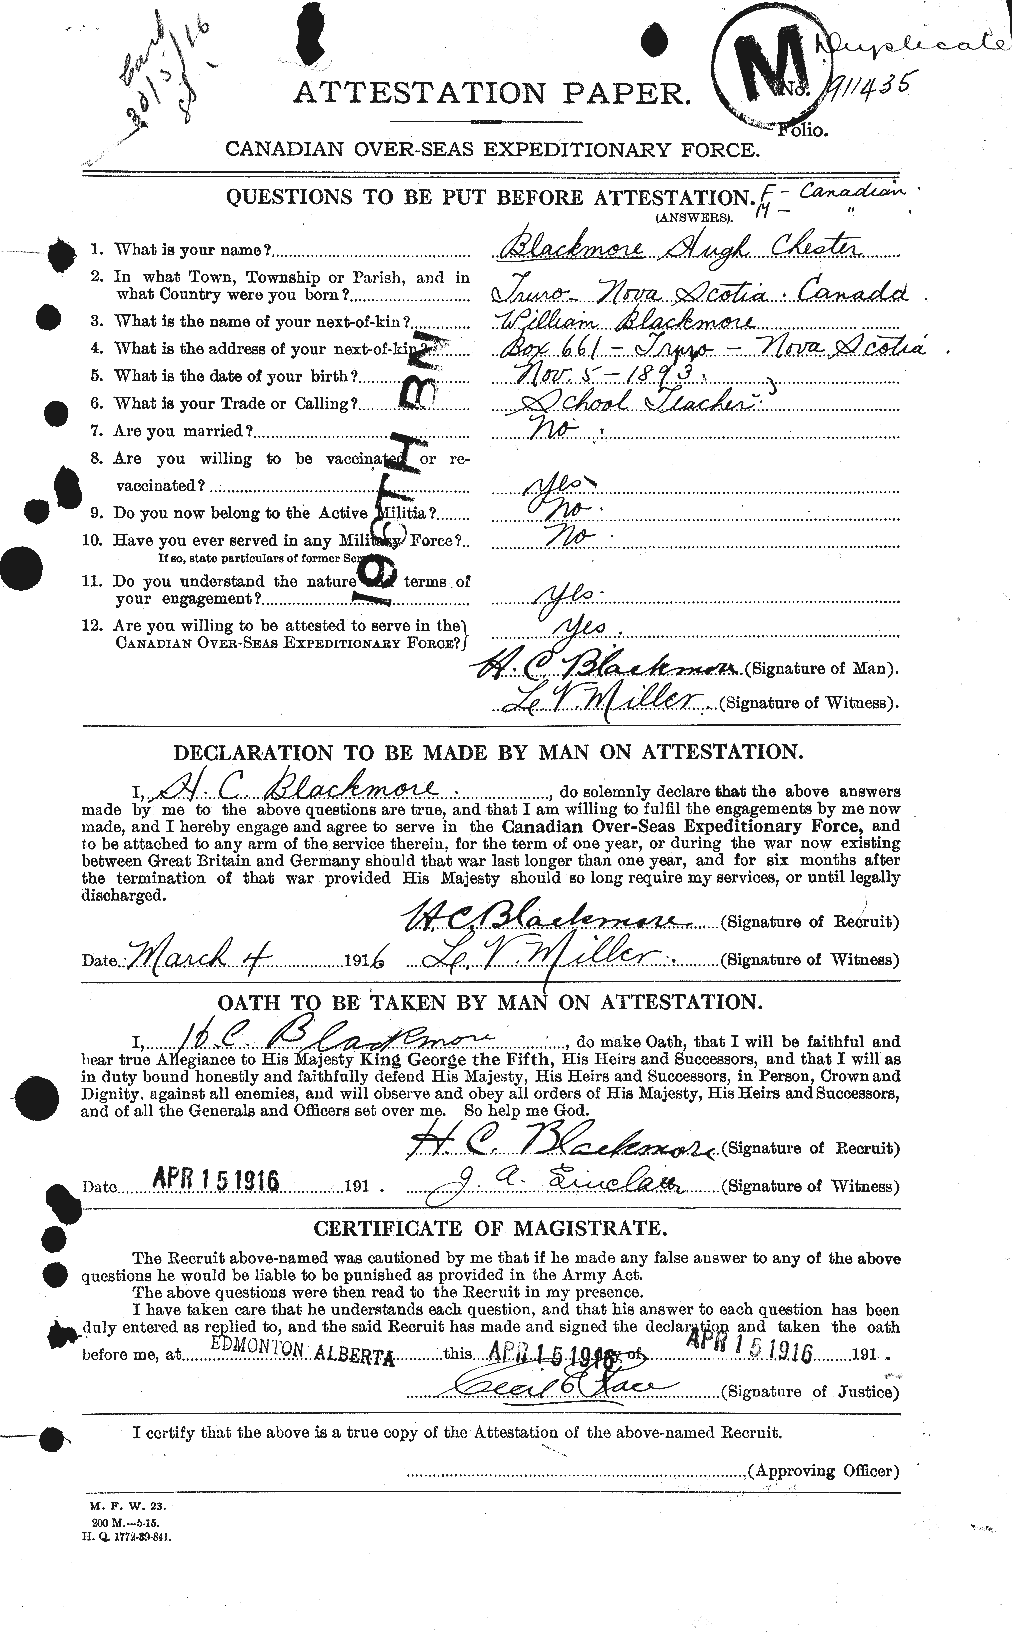 Personnel Records of the First World War - CEF 248377a